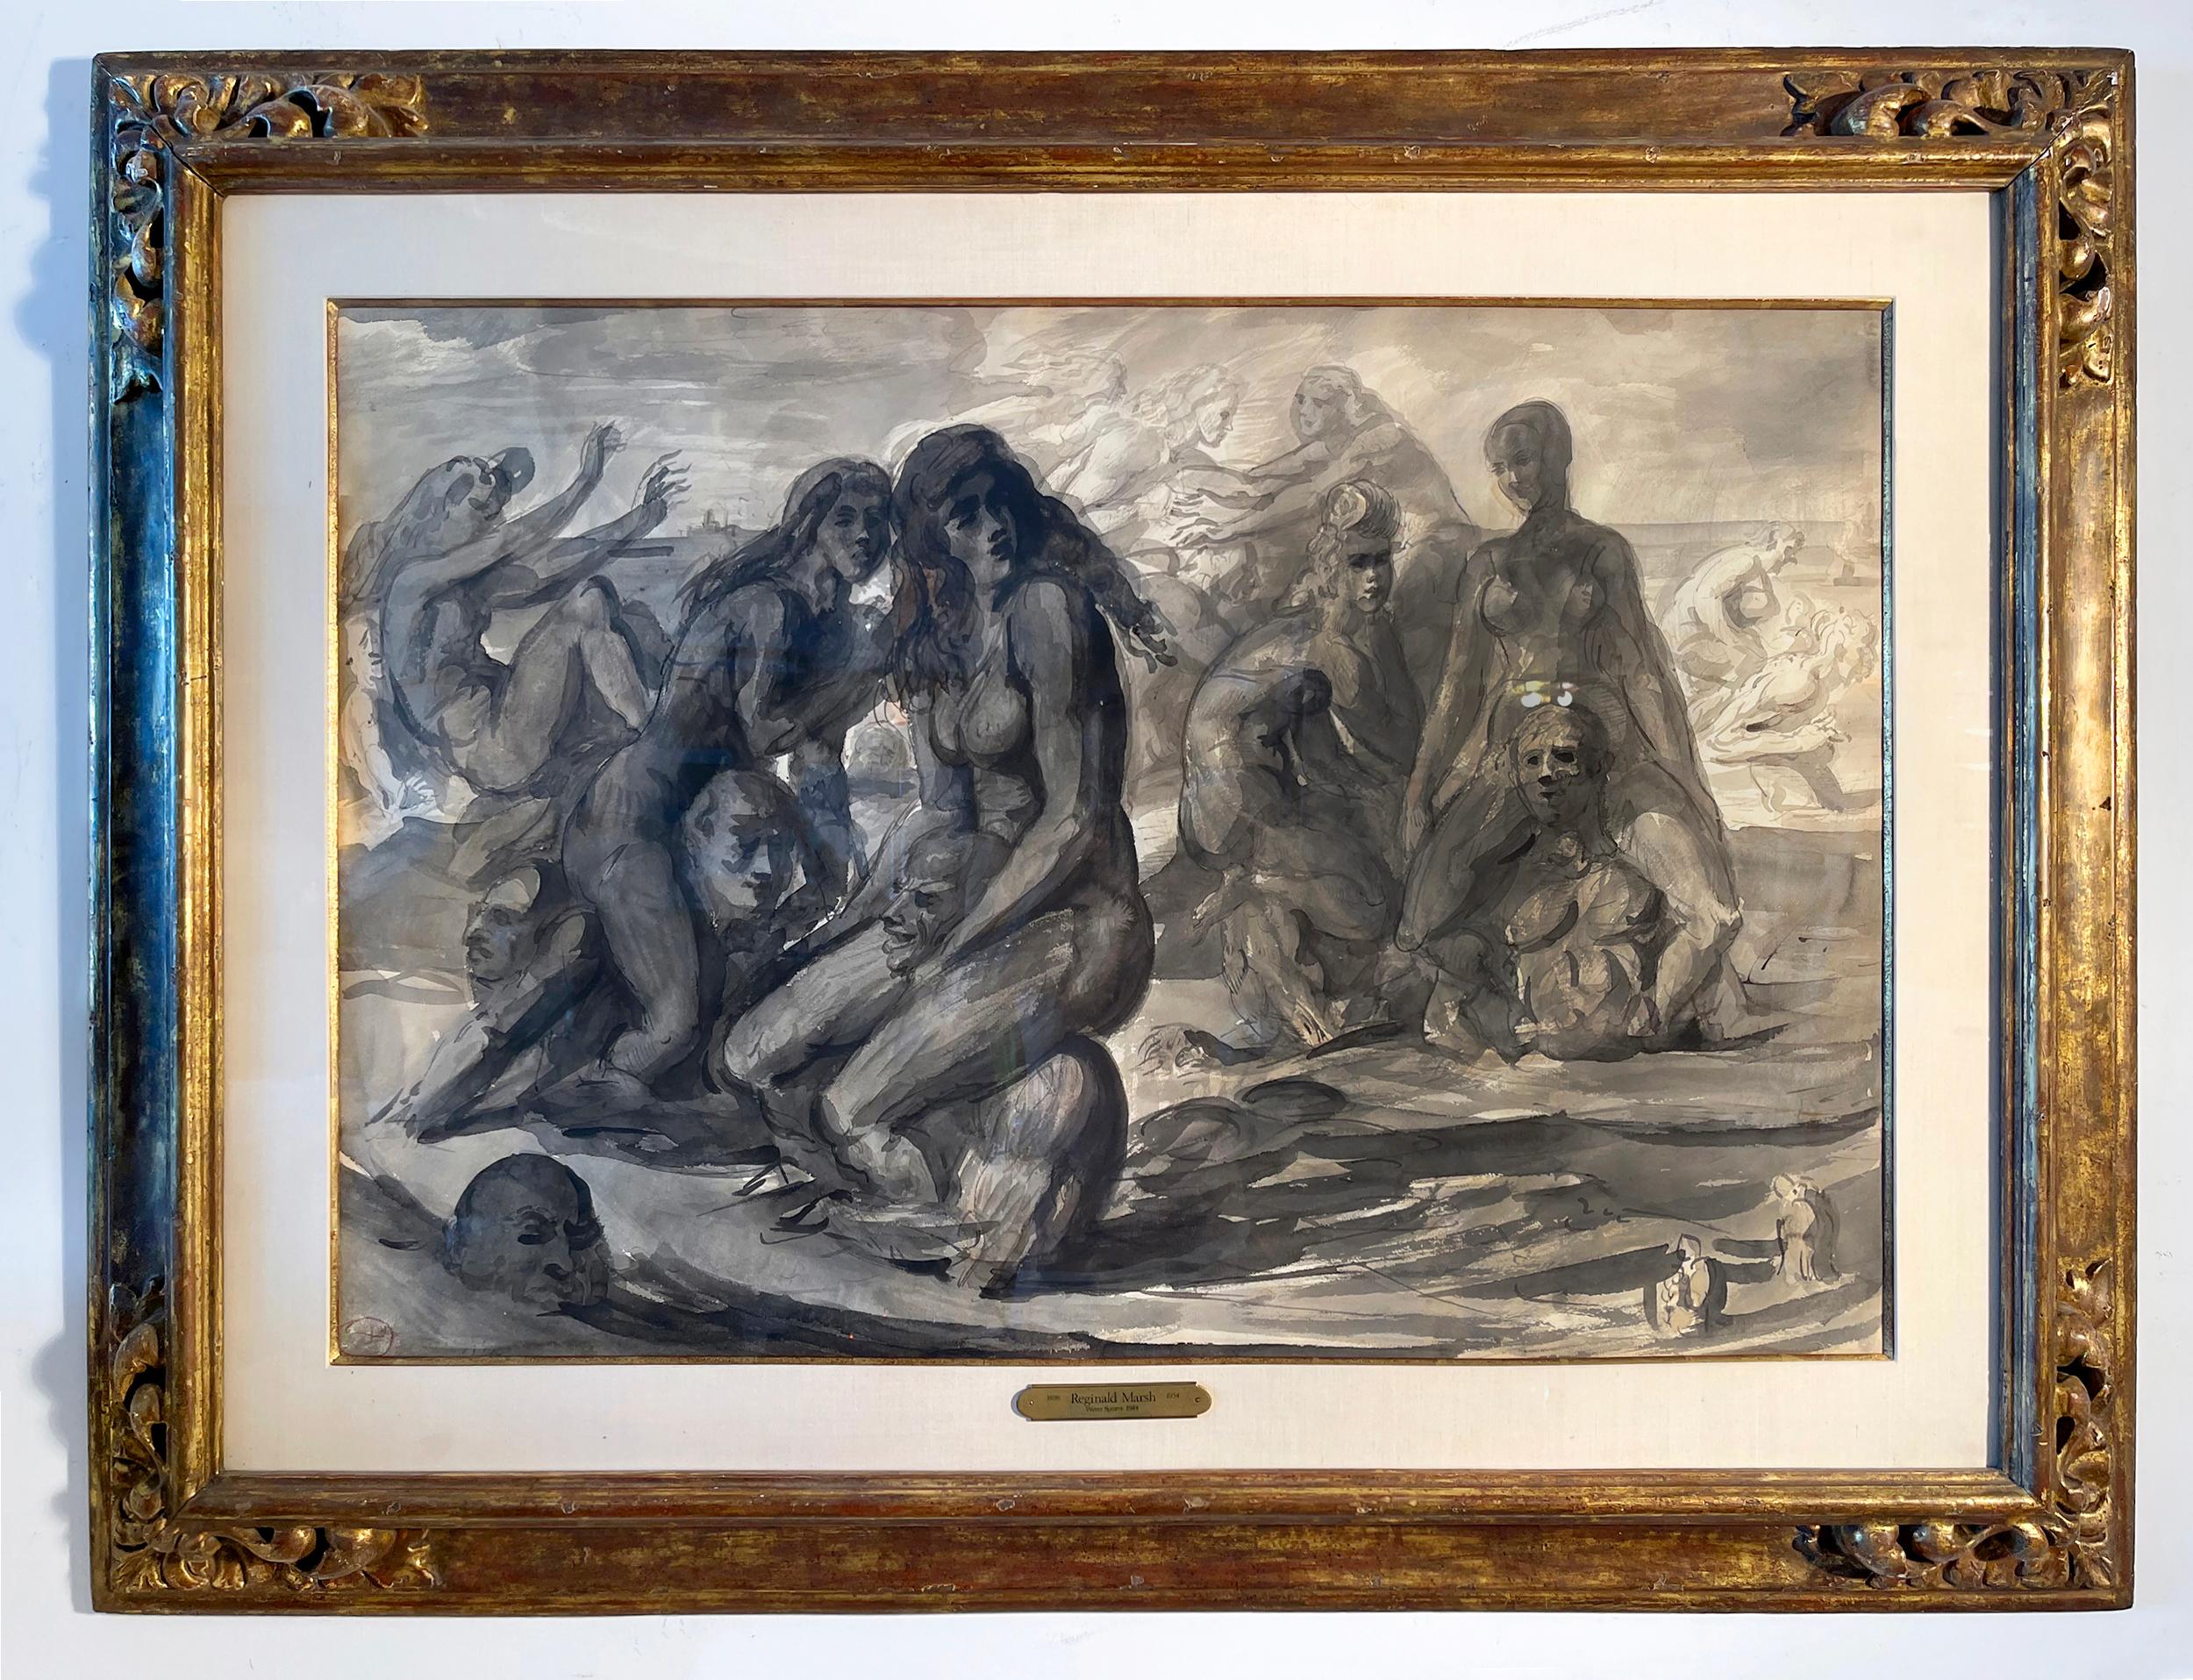 Historically, academic artists have always featured the central figures in their composition in a prominent light with the background figures being darker.   In water sports, Reginald Marsh does the opposite. The central figures are in shadow and